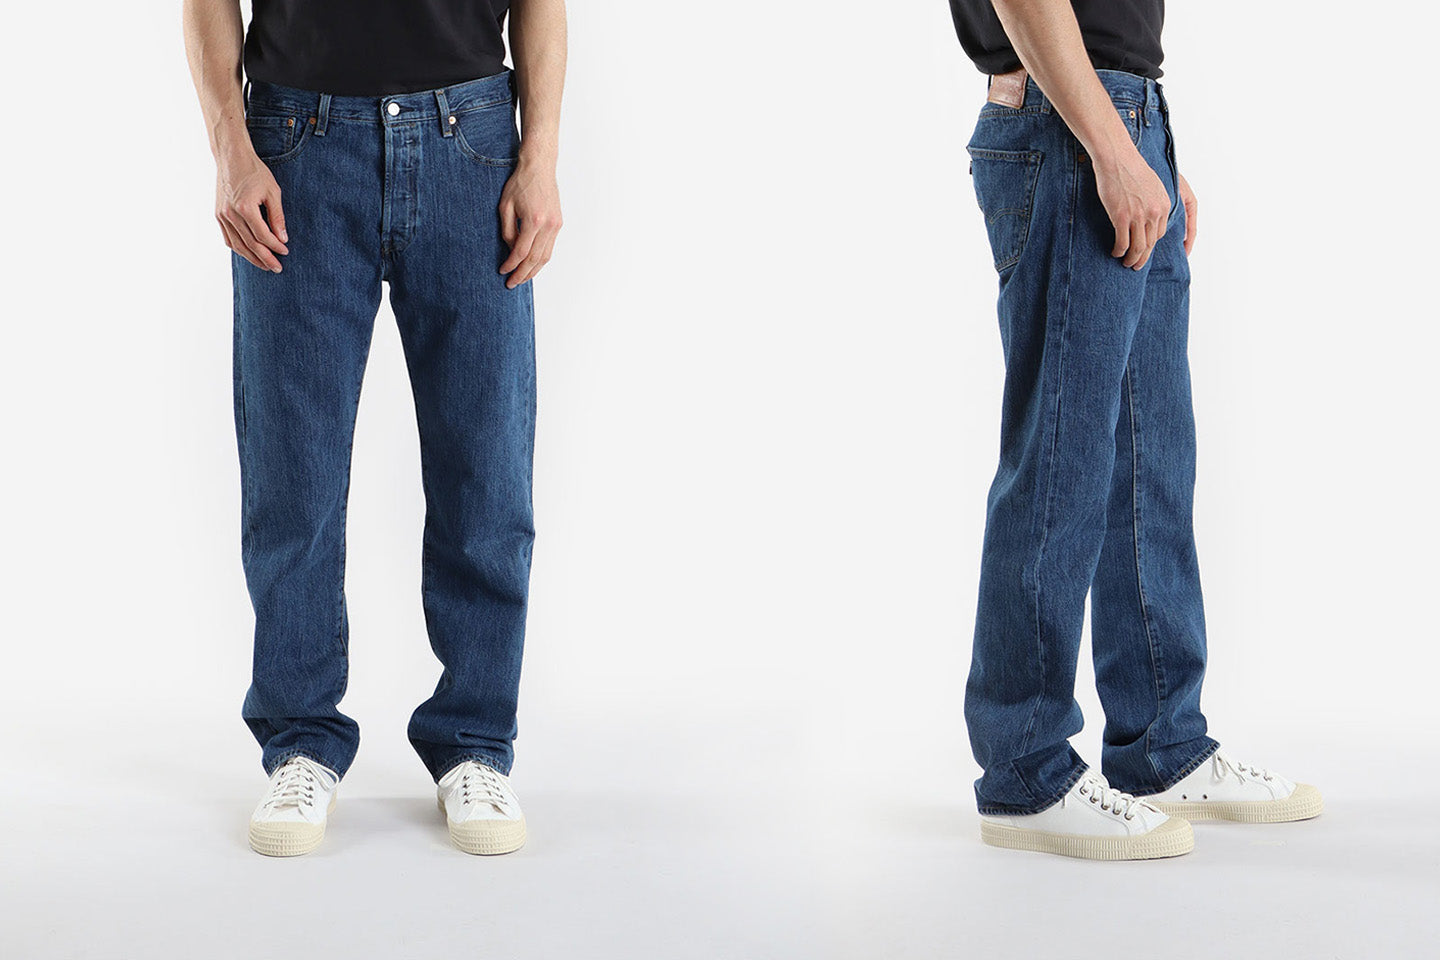 Levi's Guide | How do Levi's Jeans Fit? – Urban